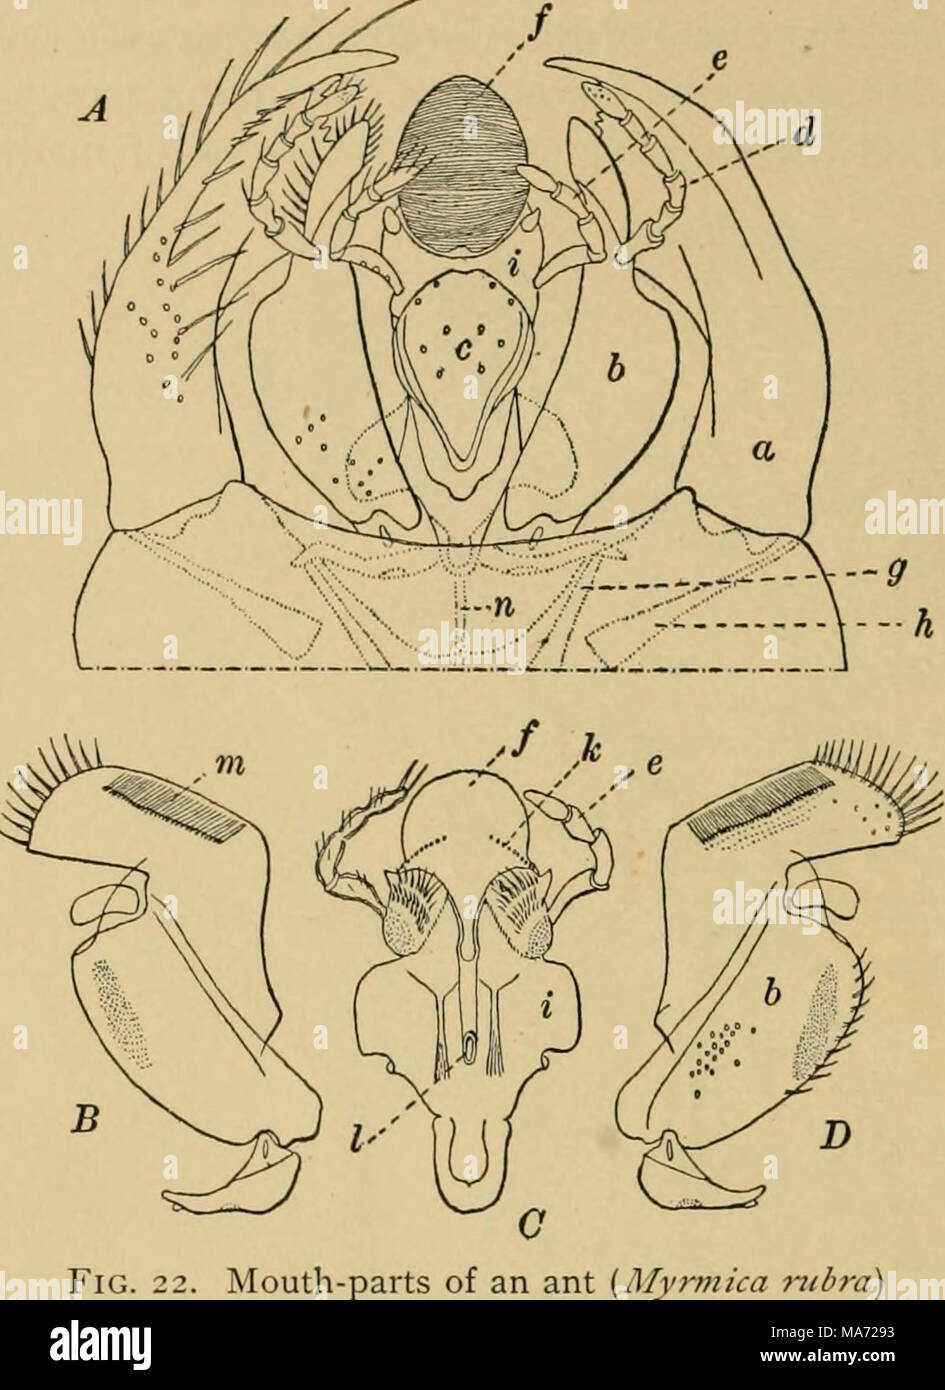 . Elementary entomology . Fig. 22. Mouth-parts of an ant {Myrmica 7iibra A, seen from the lower side in situ; B and D, maxillae; C, labium seen from the upper side, detached ; «, mandible ; b, maxilla; c^ mentum ; d^ maxillary palp; c, labial palp ; /, glossa or tongue ; g, adductor muscle of mandible ; //, abductor muscle of mandible ; ?, labium ; k, gustatory organs ; /, duct of salivary glands; m, maxillary comb; «, gular apodeme. (After Janet, from Wheeler) Stock Photo